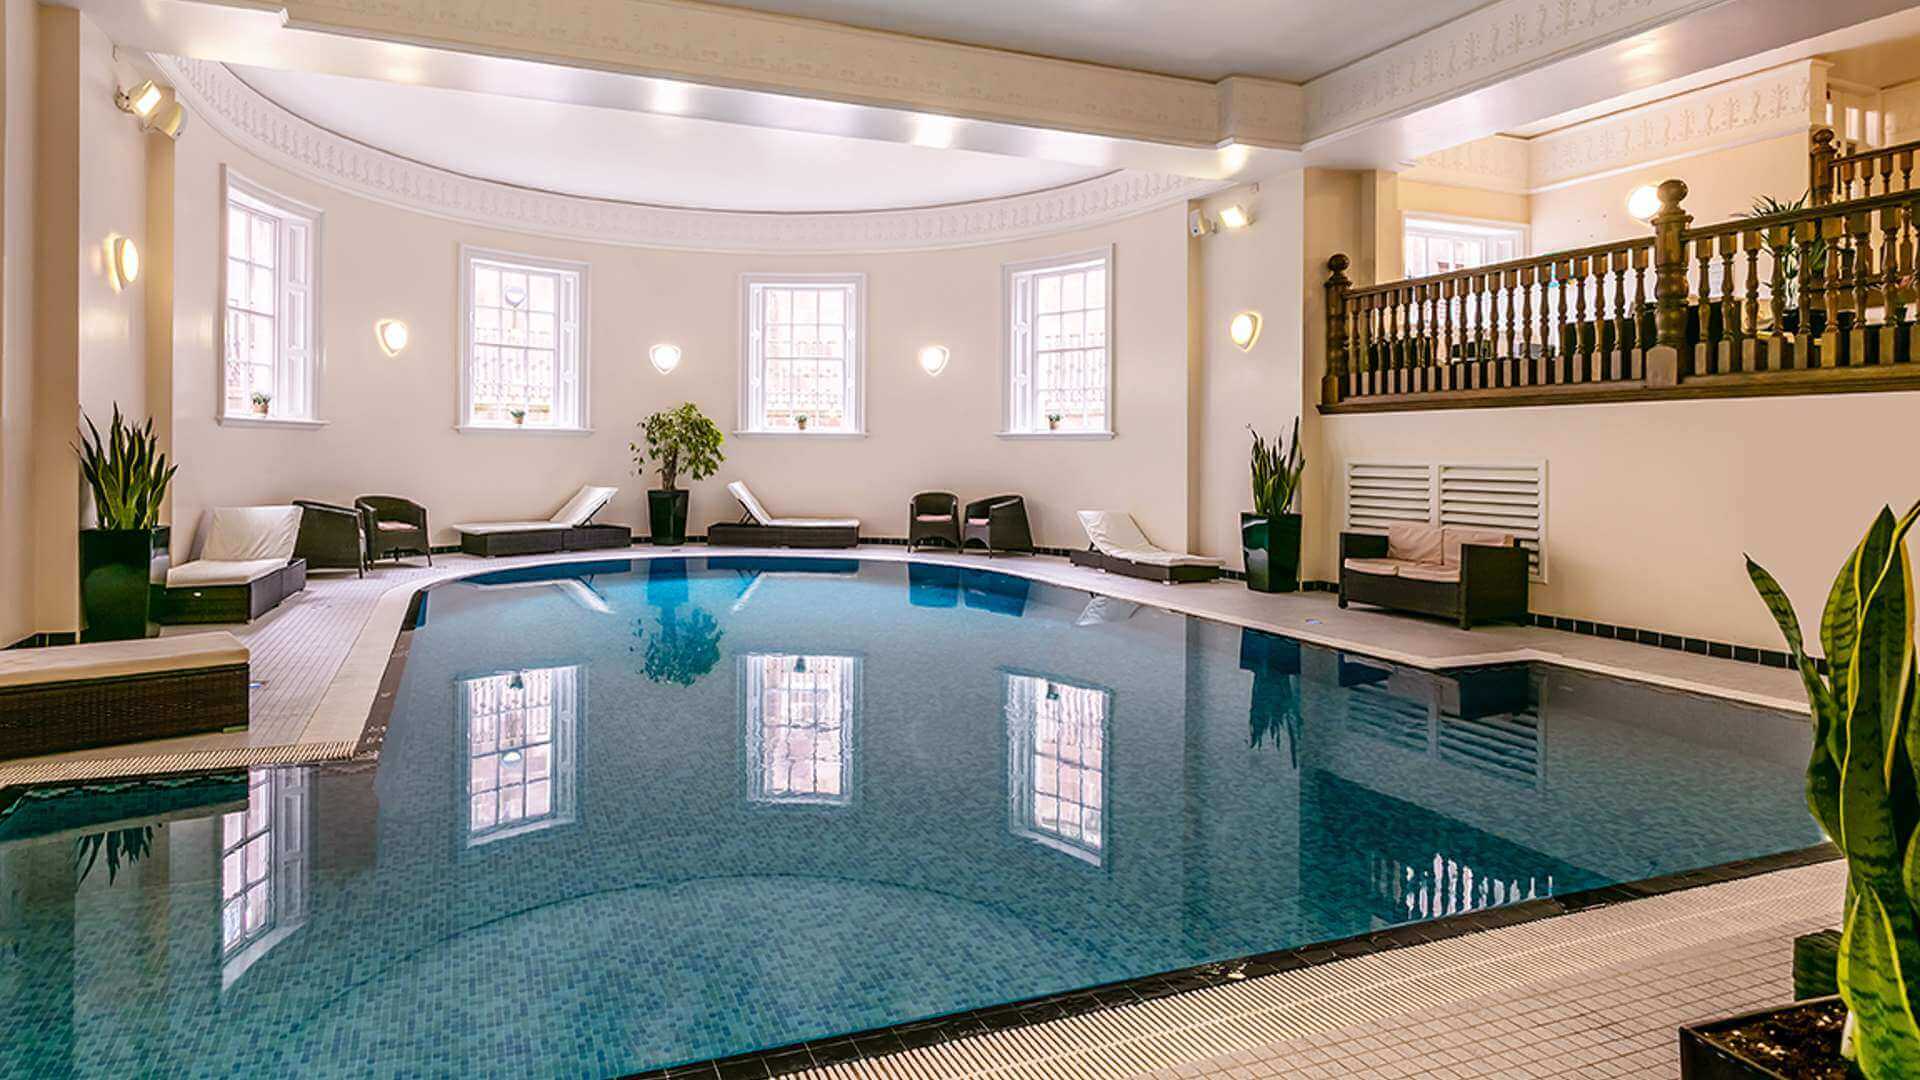 Leisure facilities at Doxford Hall Hotel and Spa